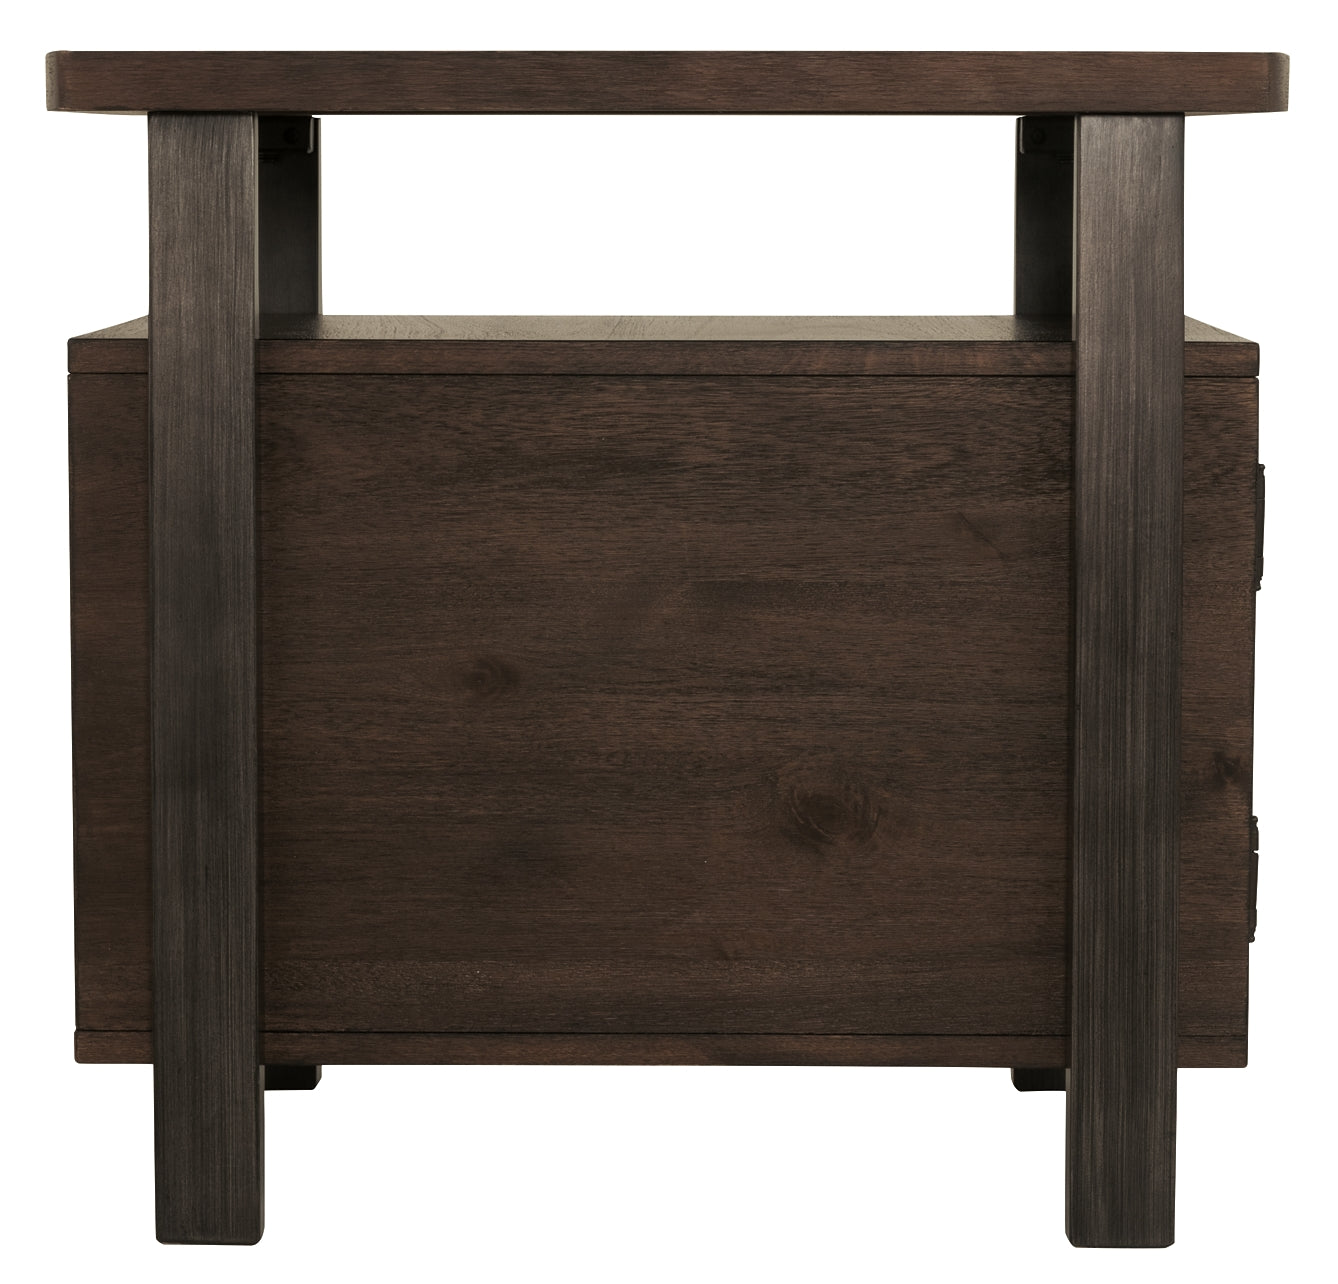 Ashley Express - Vailbry Chair Side End Table Wilson Furniture (OH)  in Bridgeport, Ohio. Serving Bridgeport, Yorkville, Bellaire, & Avondale